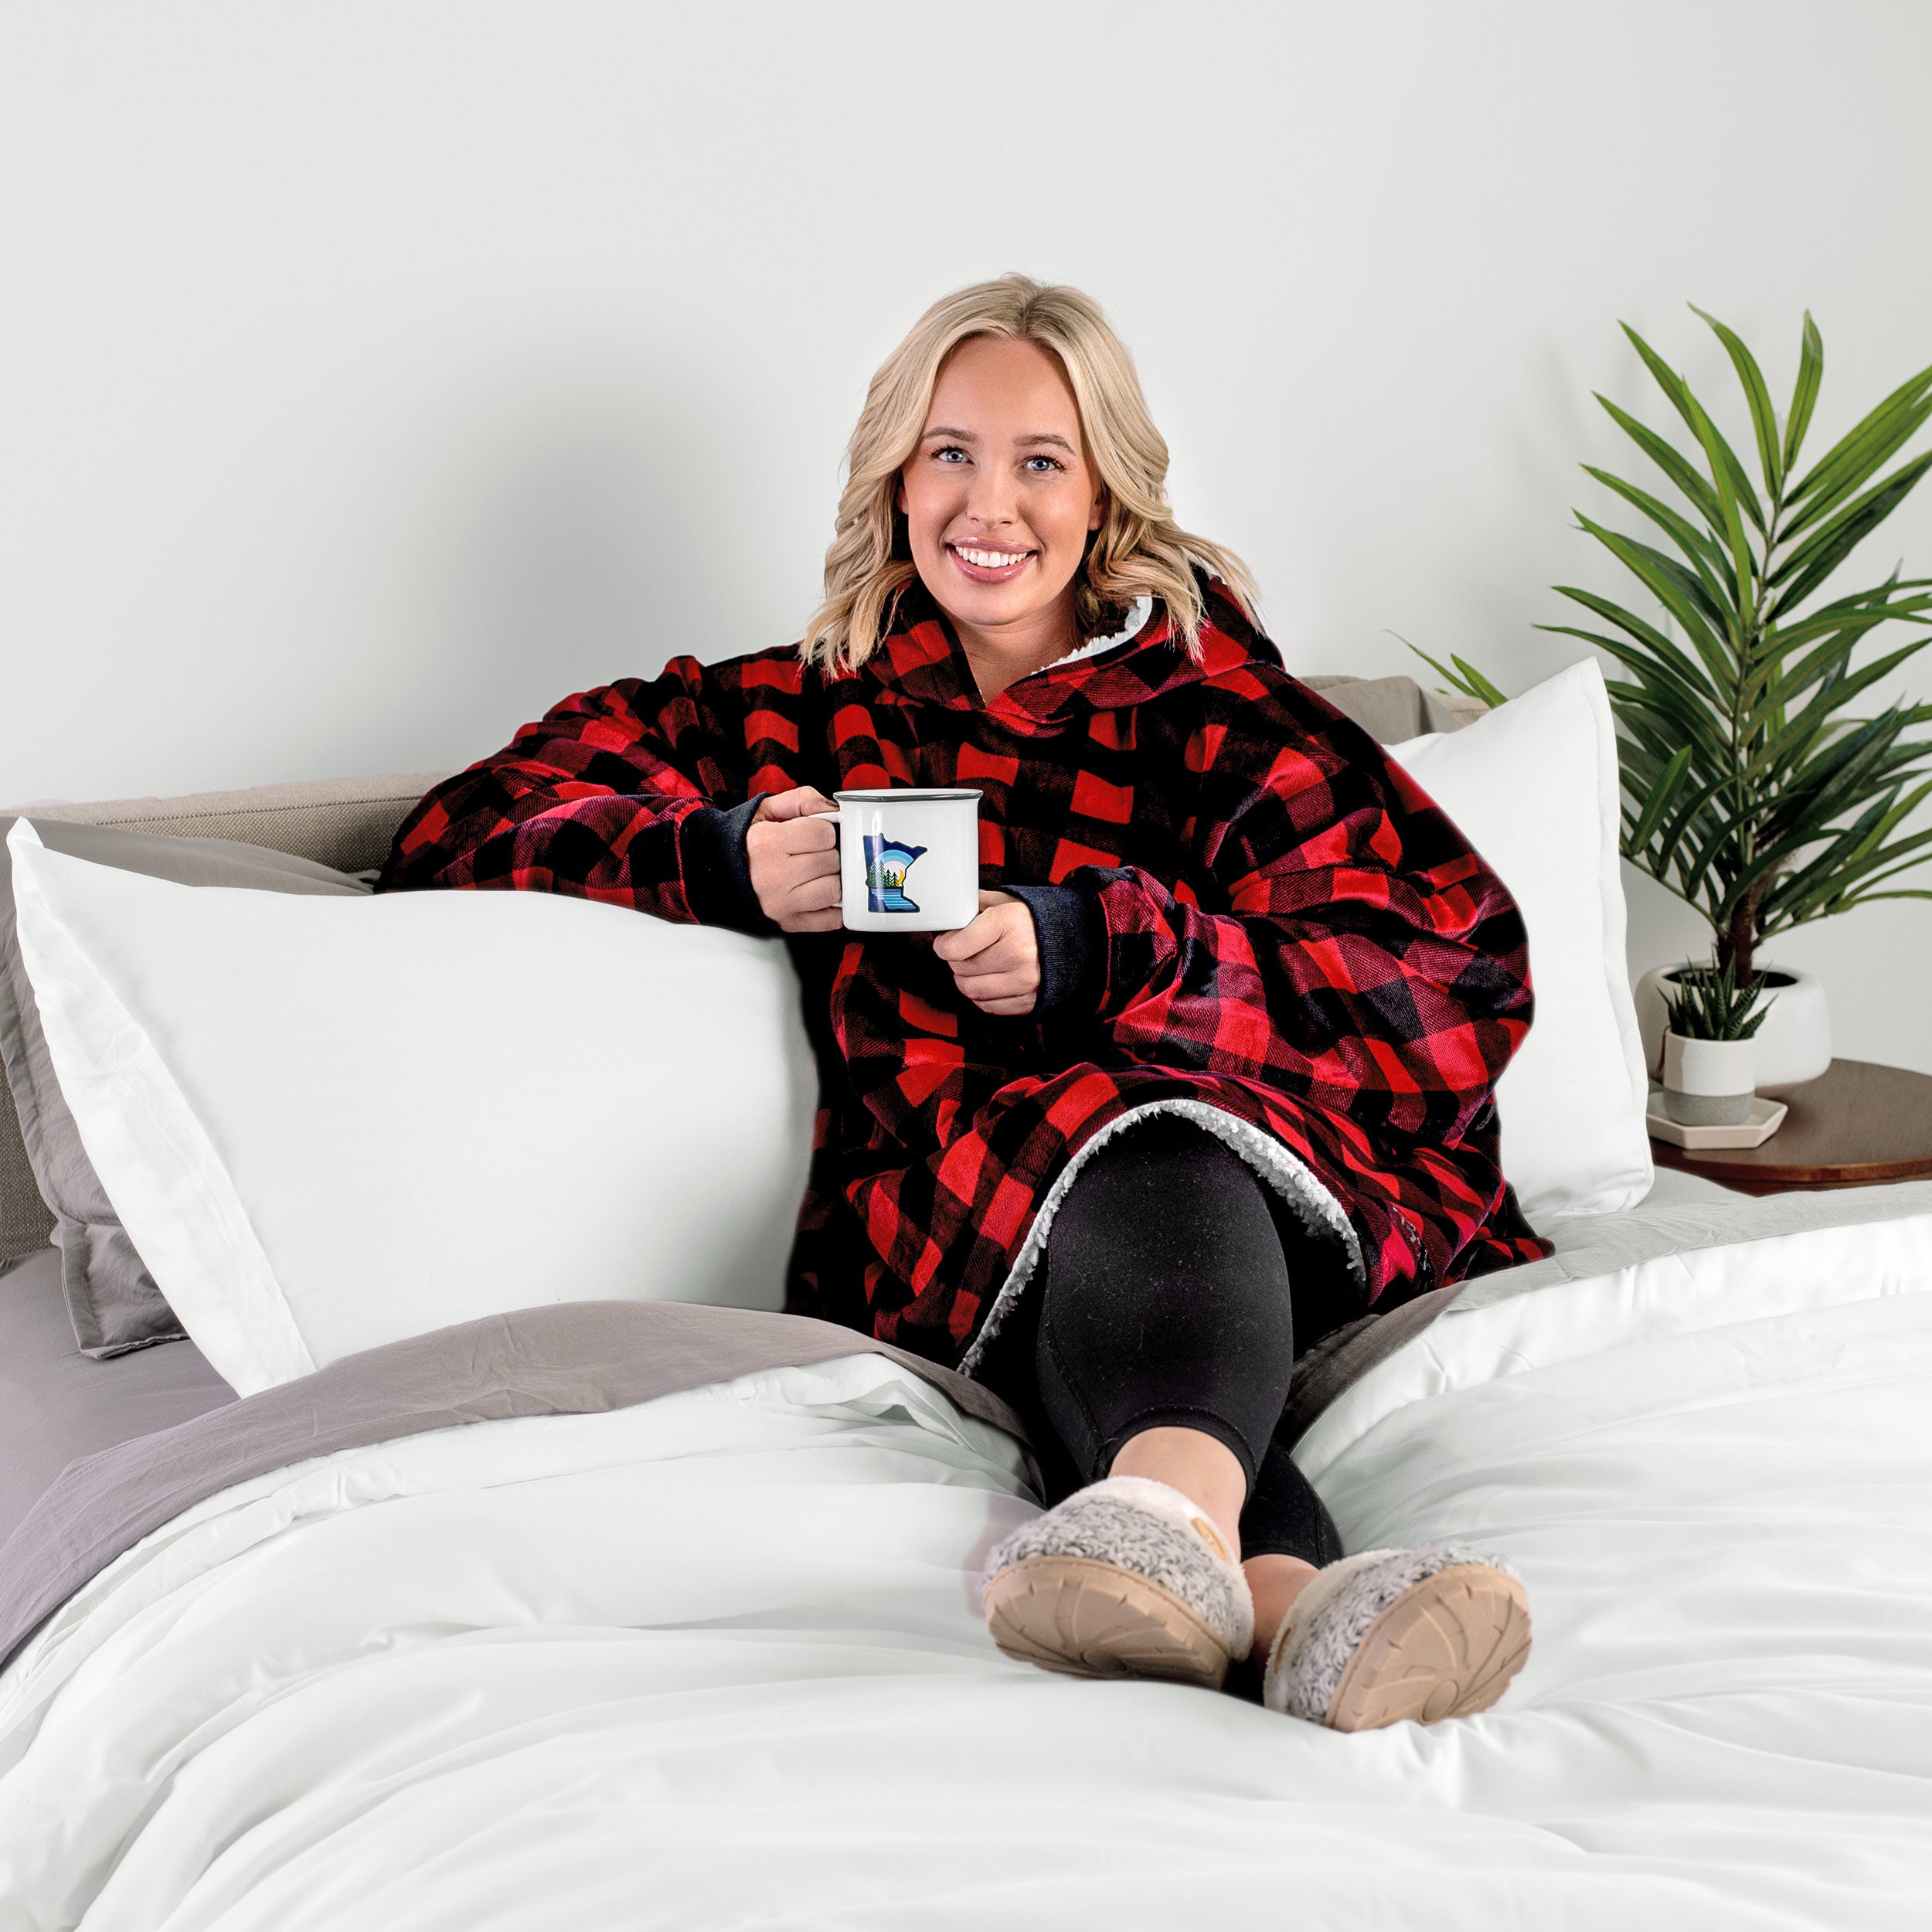 A woman sitting on a bed holding a mug wearing a sherpa blanket.